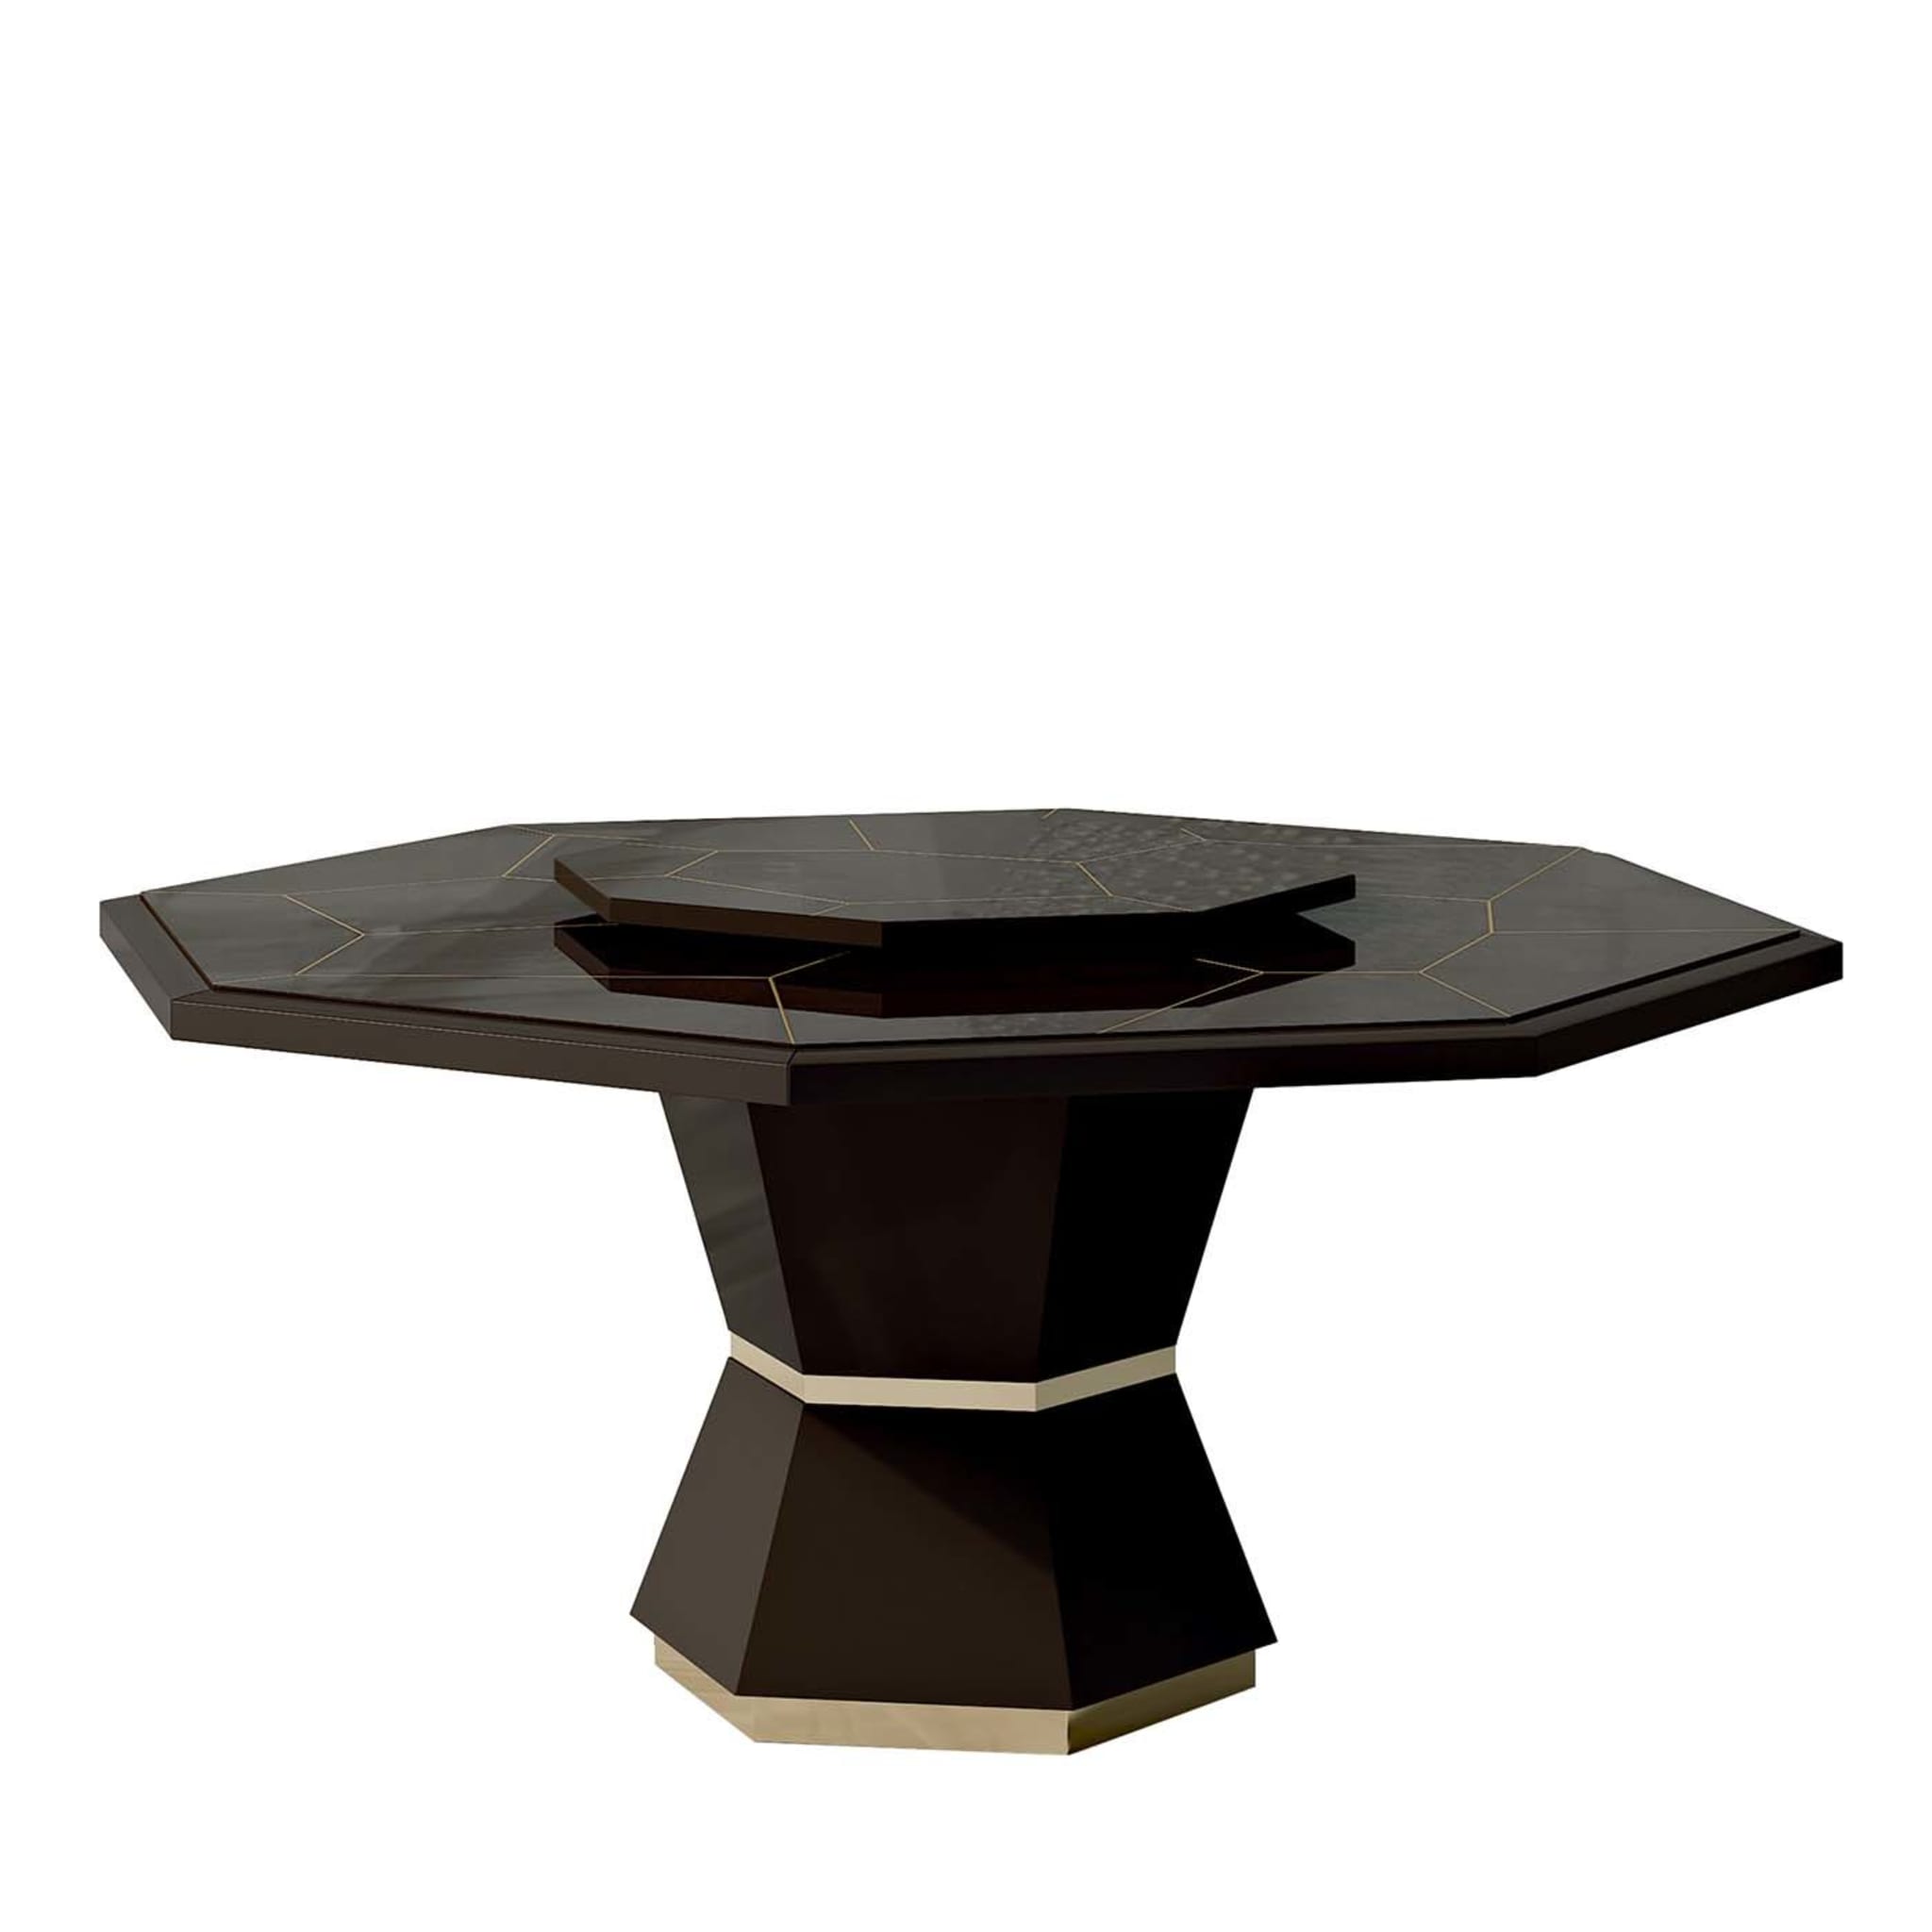 Temptation Octagonal Dining Table with Lazy Susan - Main view